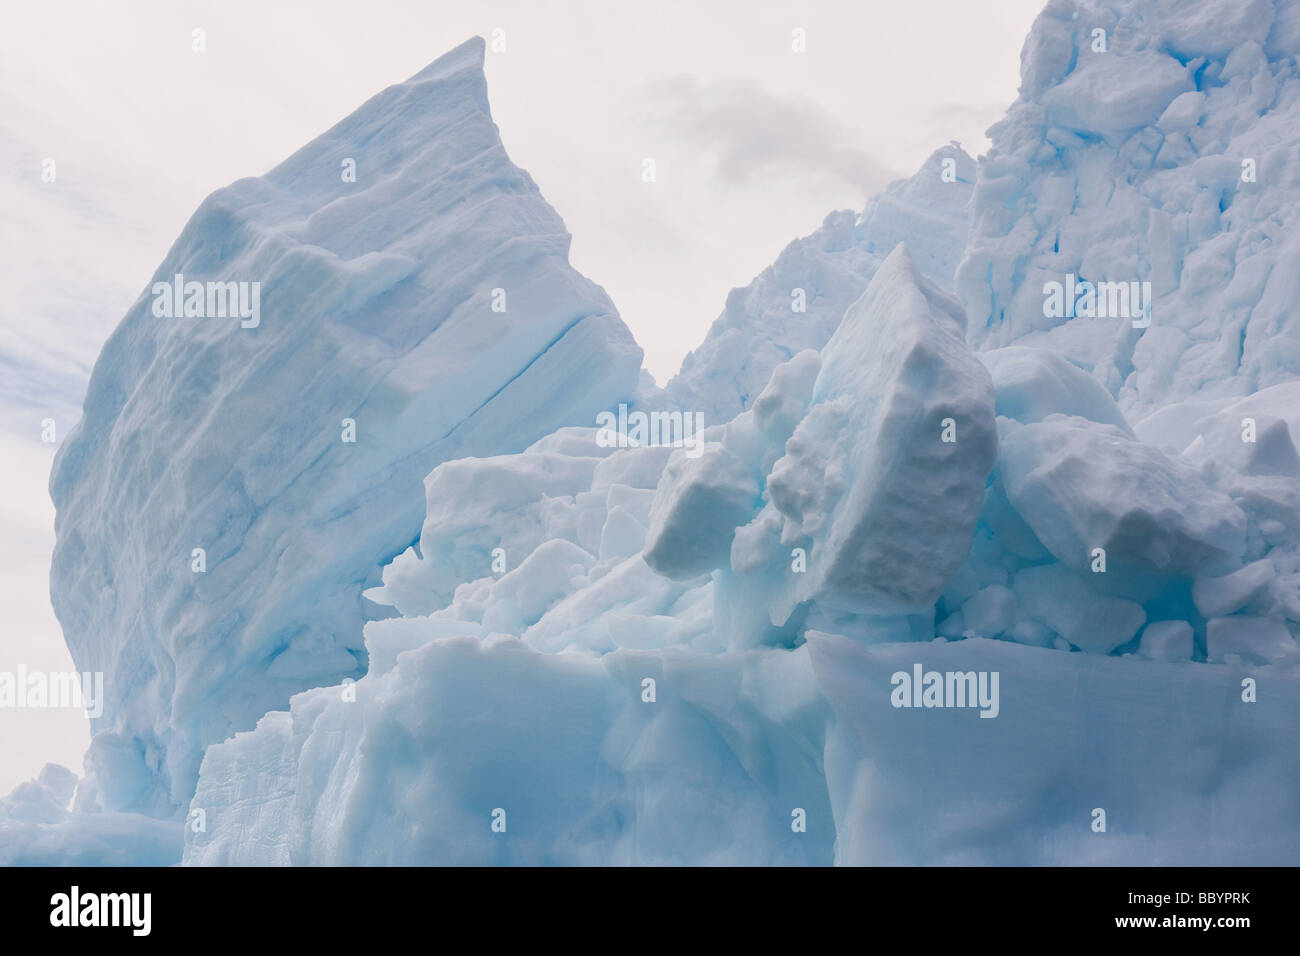 Ice landscapes from Antartica including amazing iceberg structures and features. Stock Photo